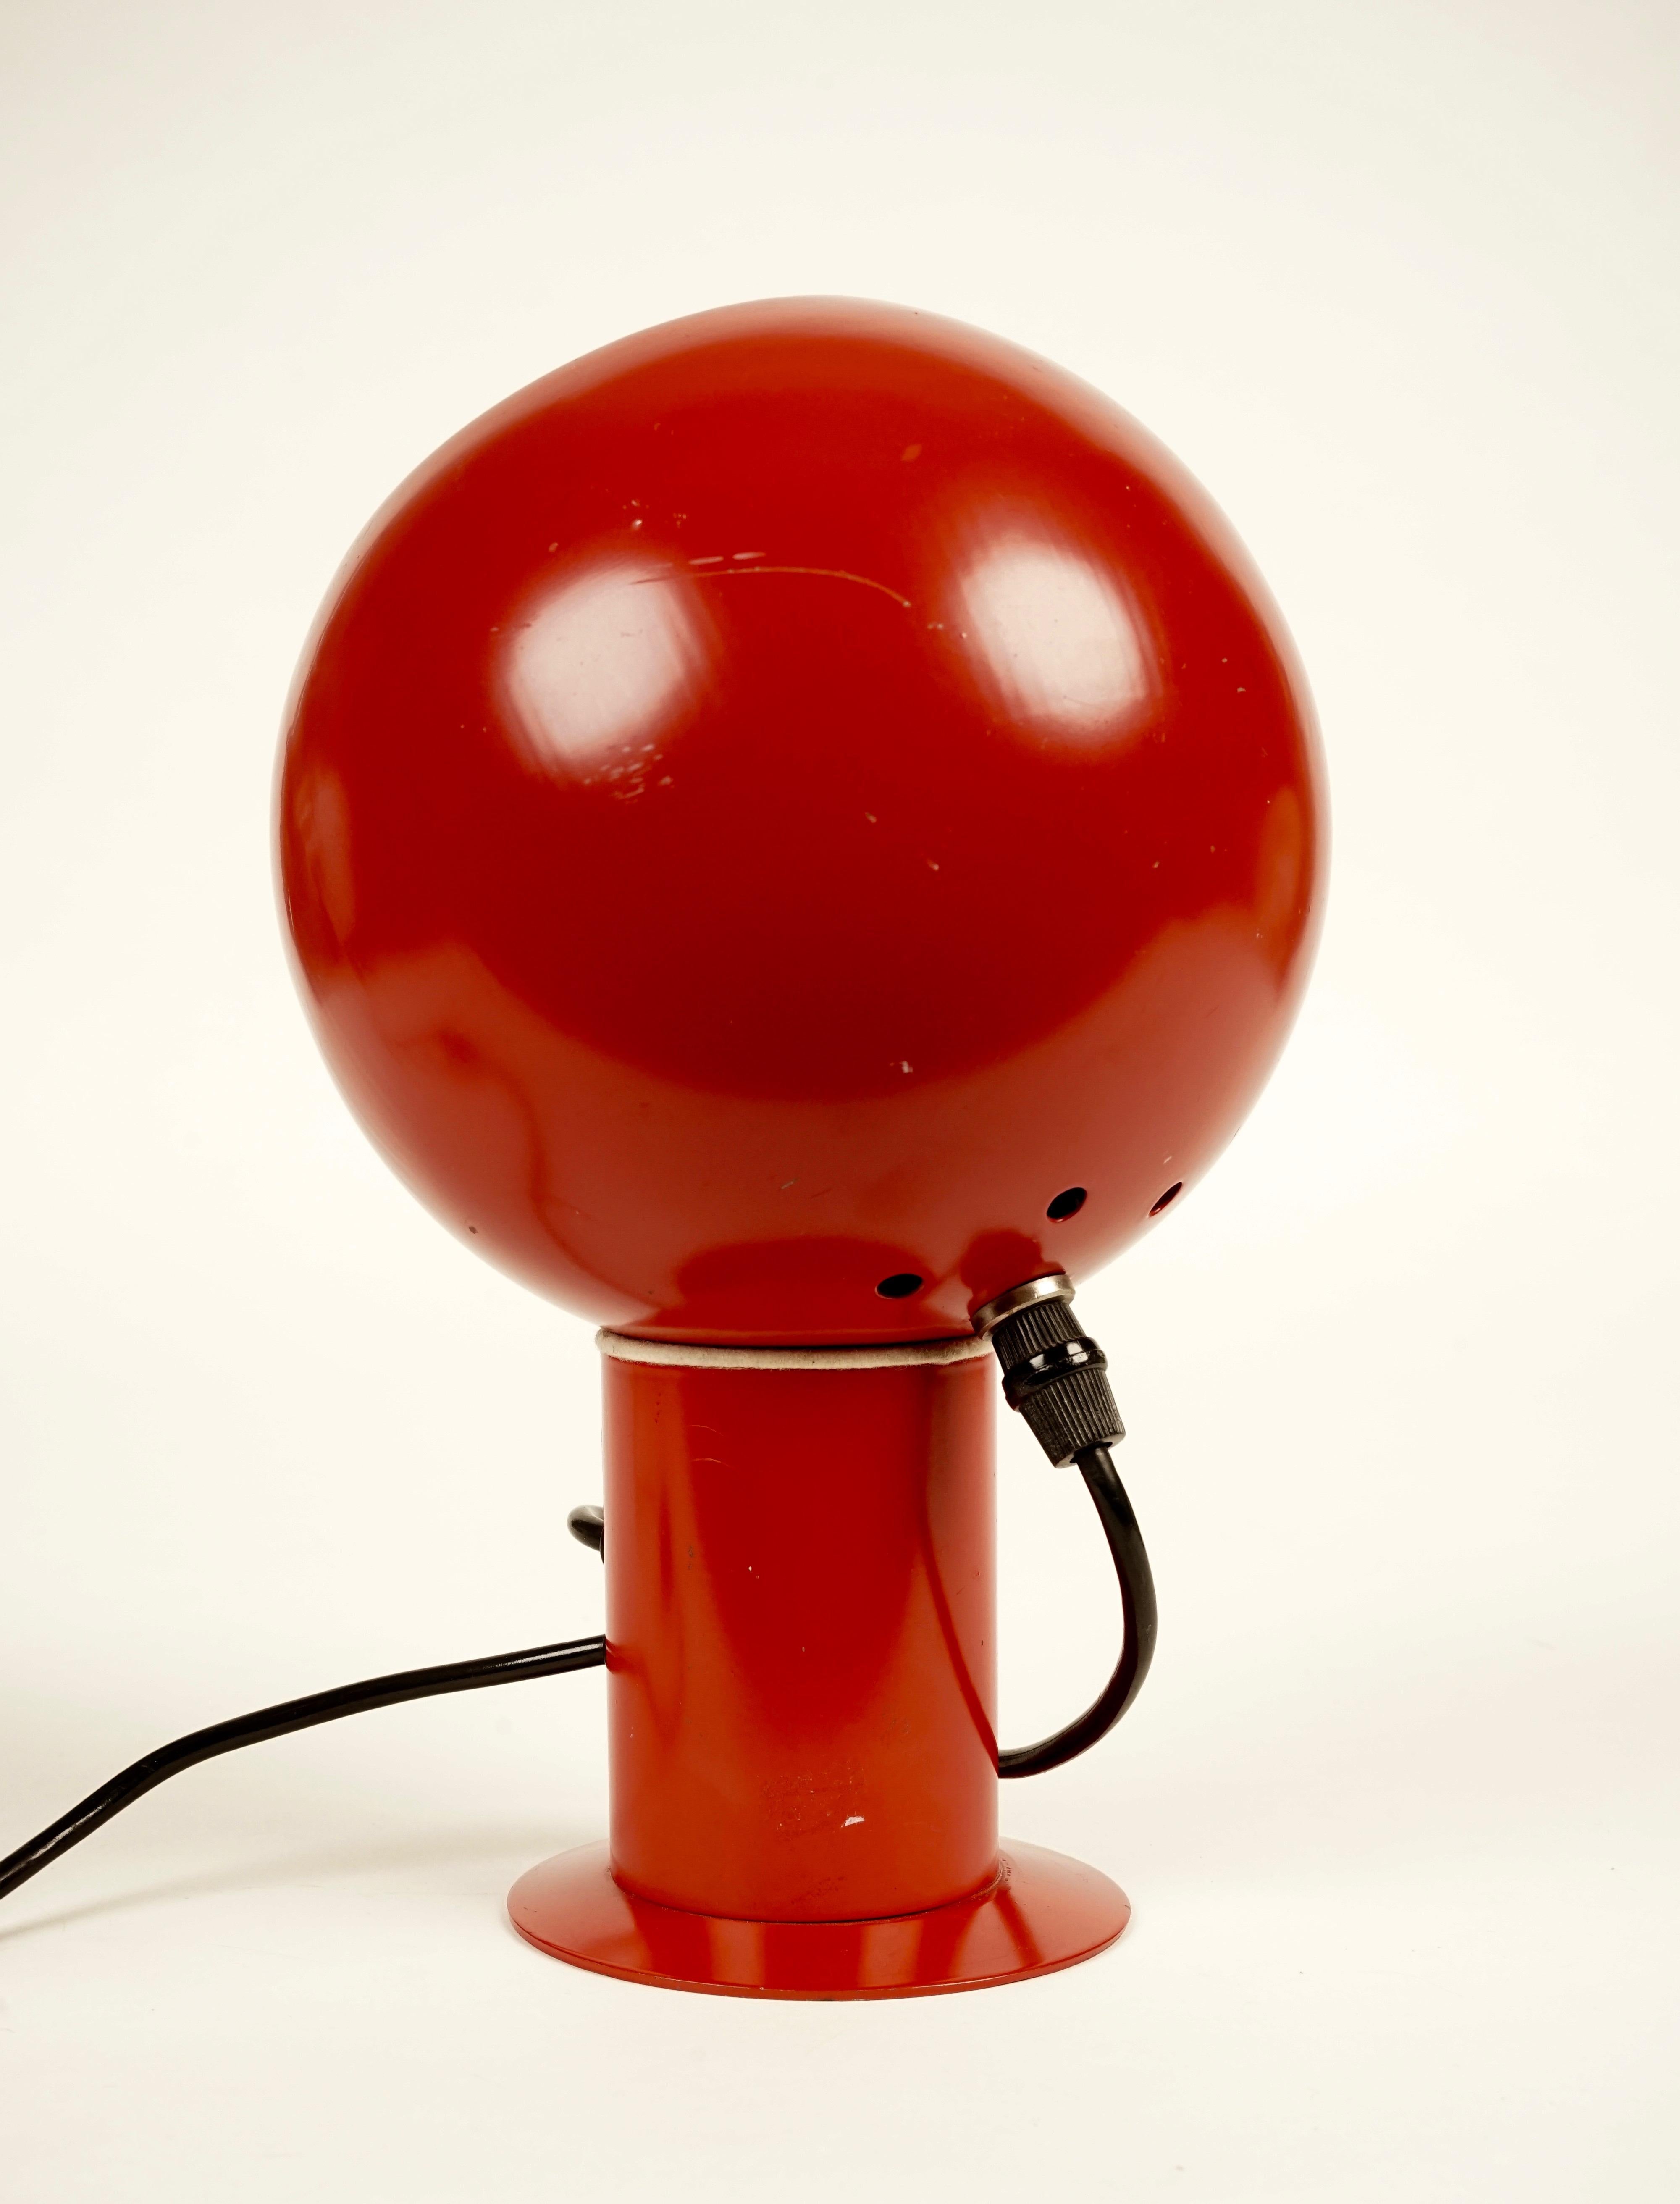 This red table lamp with adjustable ball, held together with base using a magnet.
The ball you can move in different positions.
Manufactured in Germany in 1970s.